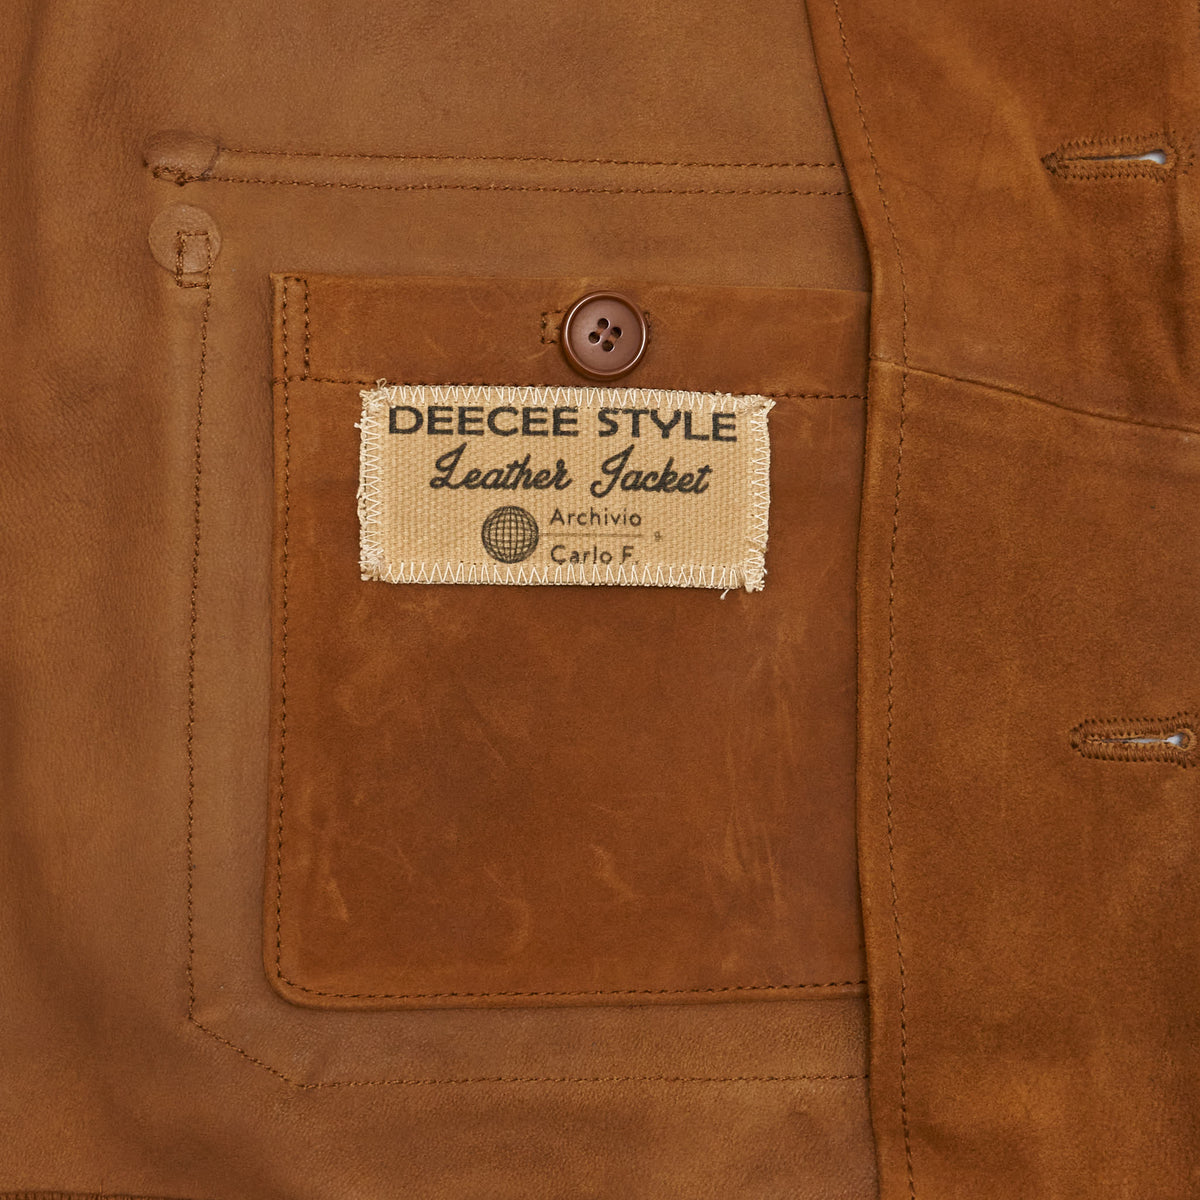 DeeCee style A1 Type Leather Jacket